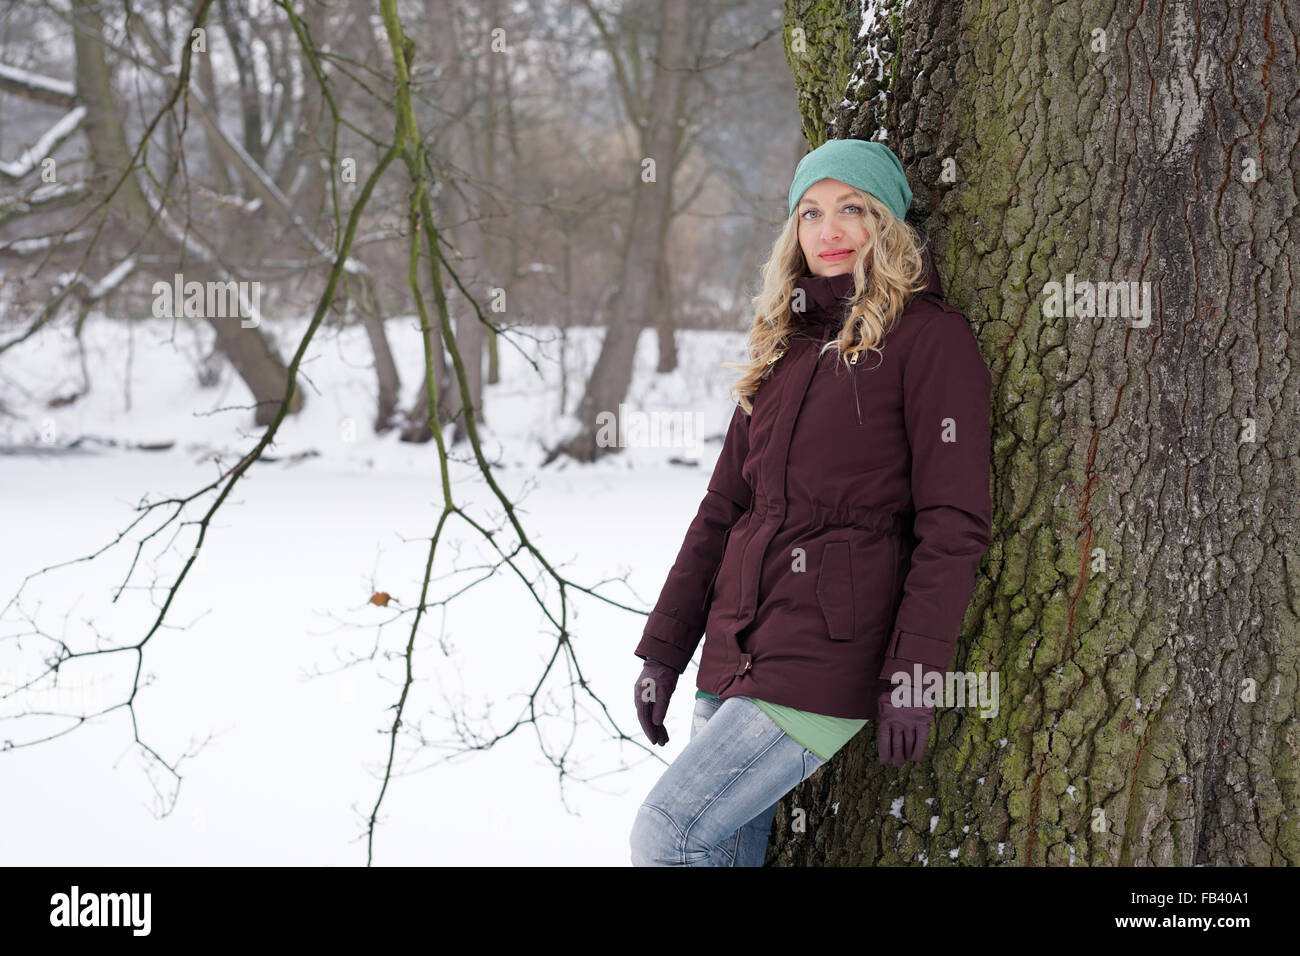 woman leaning against tree in winter landscape Stock Photo